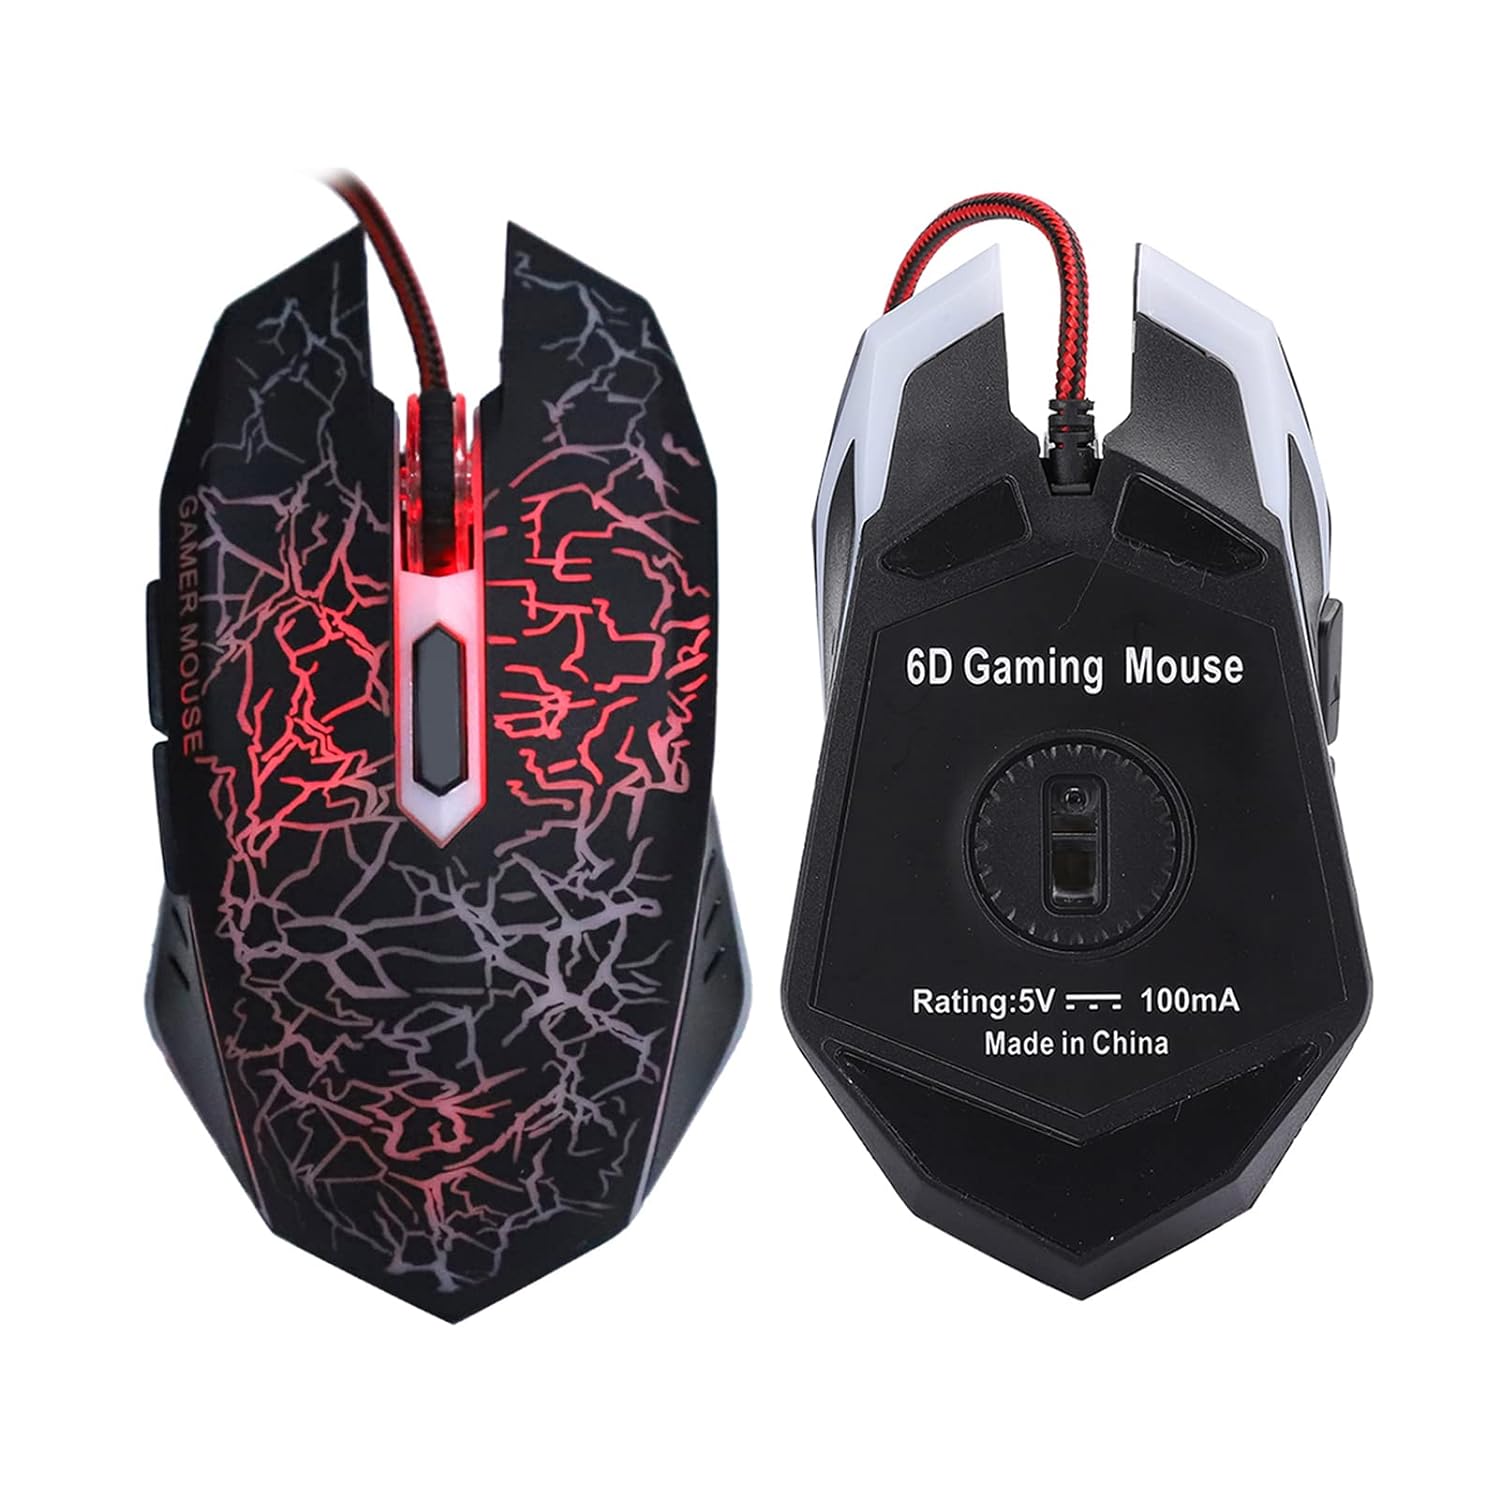 thinkstar A70 Professional Wired Gaming Mouse, Universal Usb Optical Gaming Mouse With Colorful Breathing Led Light, Ergonomic 6